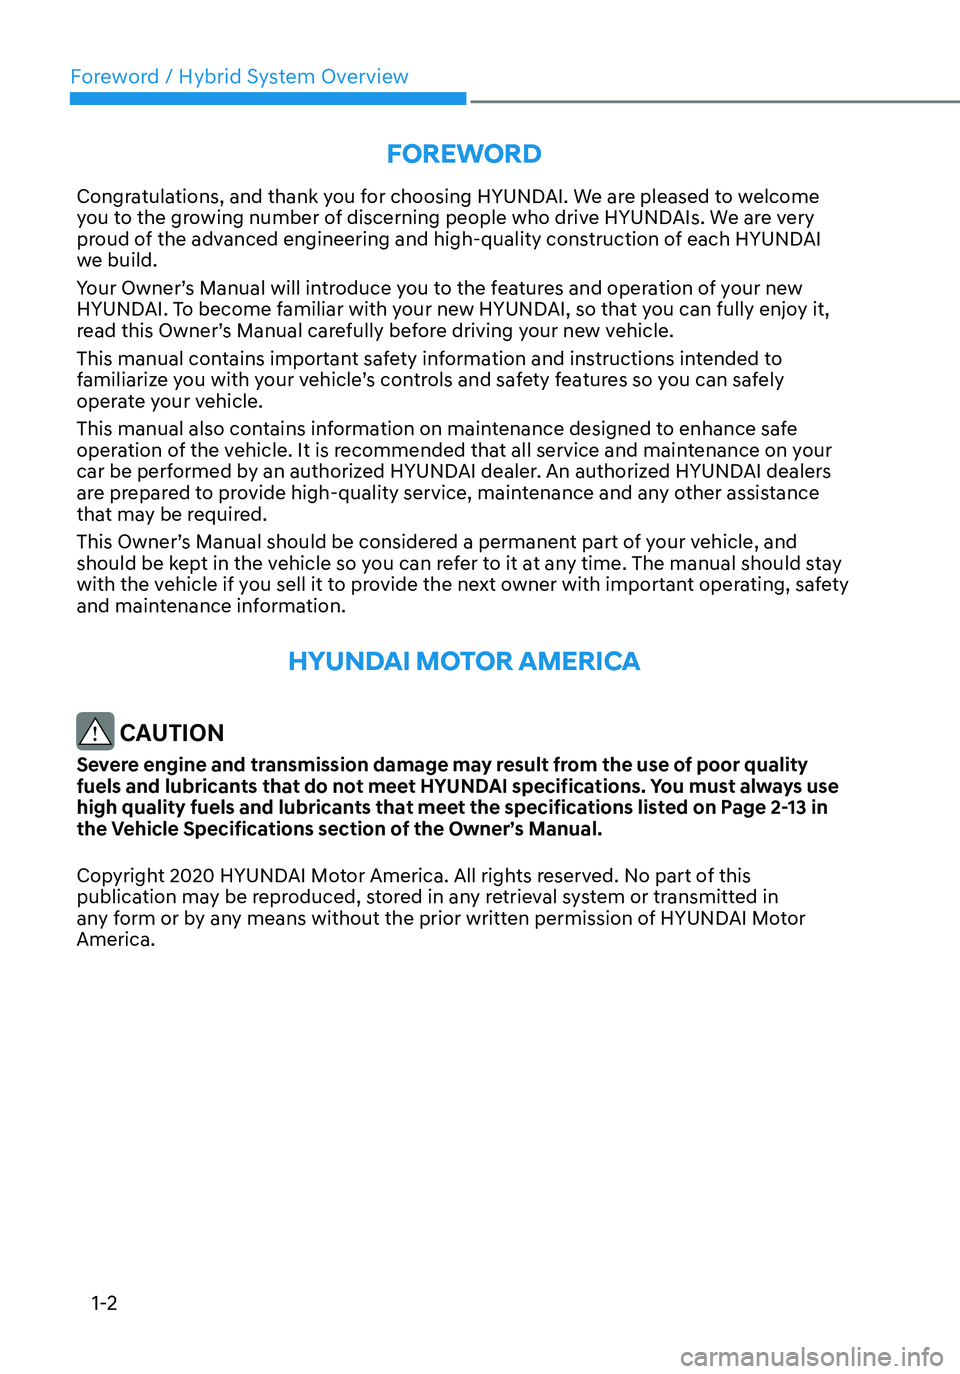 HYUNDAI SANTA FE HYBRID 2021  Owners Manual Foreword / Hybrid System Overview
1-2
FOREWORD
Congratulations, and thank you for choosing HYUNDAI. We are pleased to welcome 
you to the growing number of discerning people who drive HYUNDAIs. We are